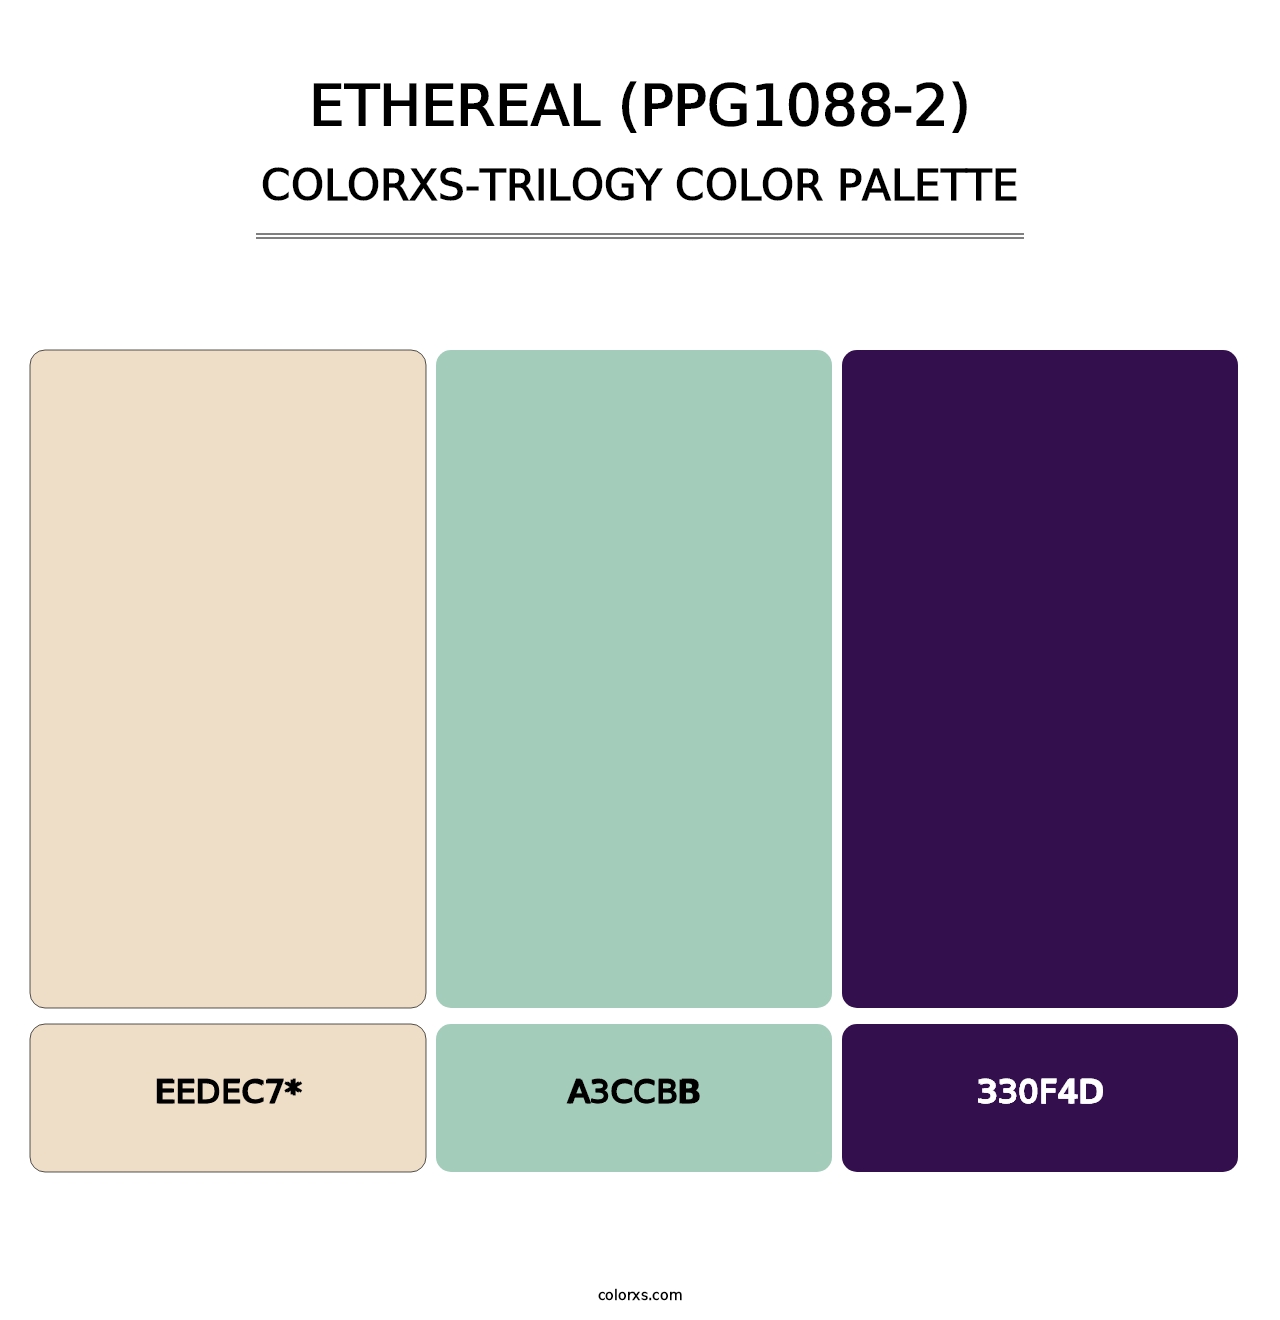 Ethereal (PPG1088-2) - Colorxs Trilogy Palette